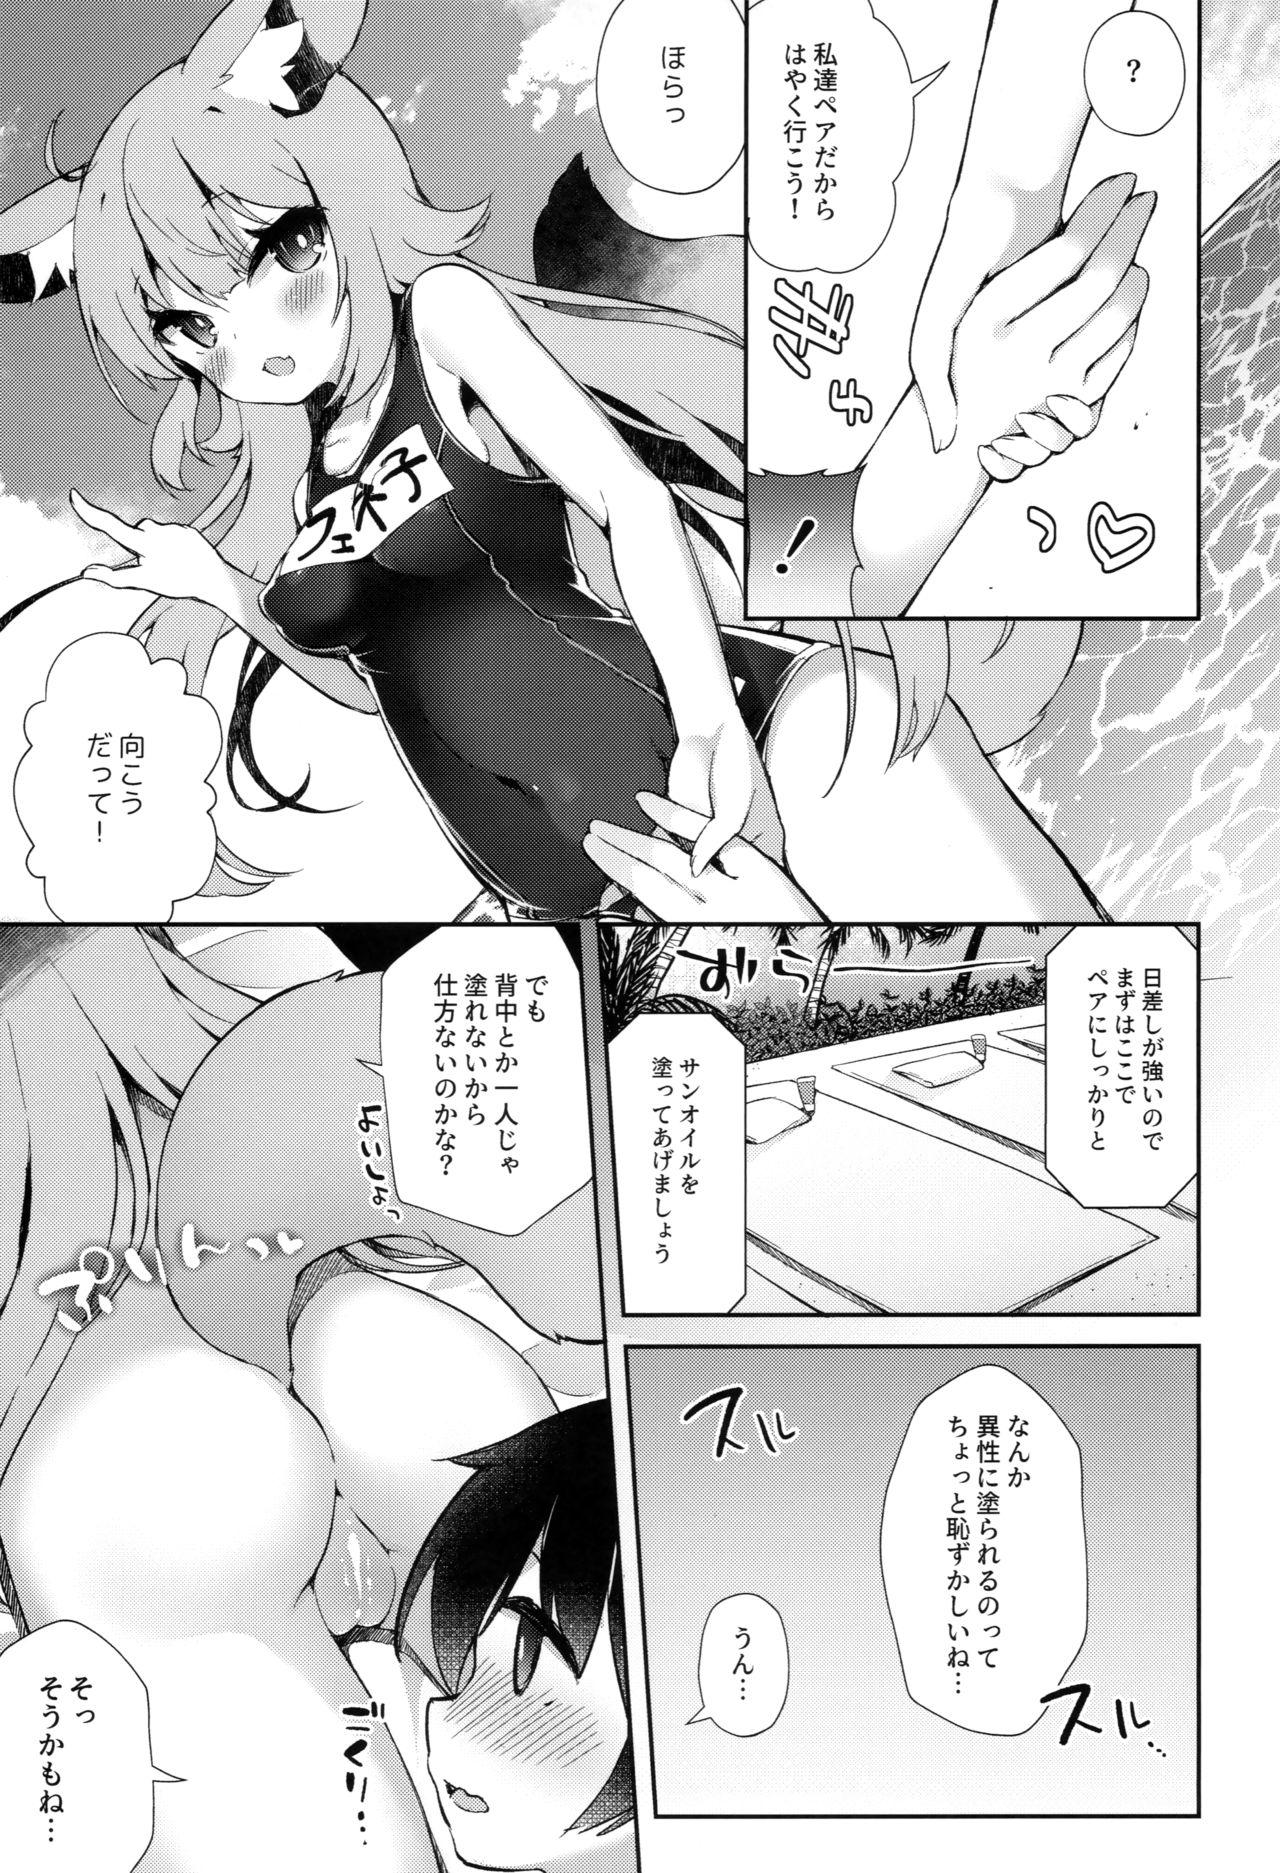 Foursome Fennec Musume Summer! - Original Nude - Page 6